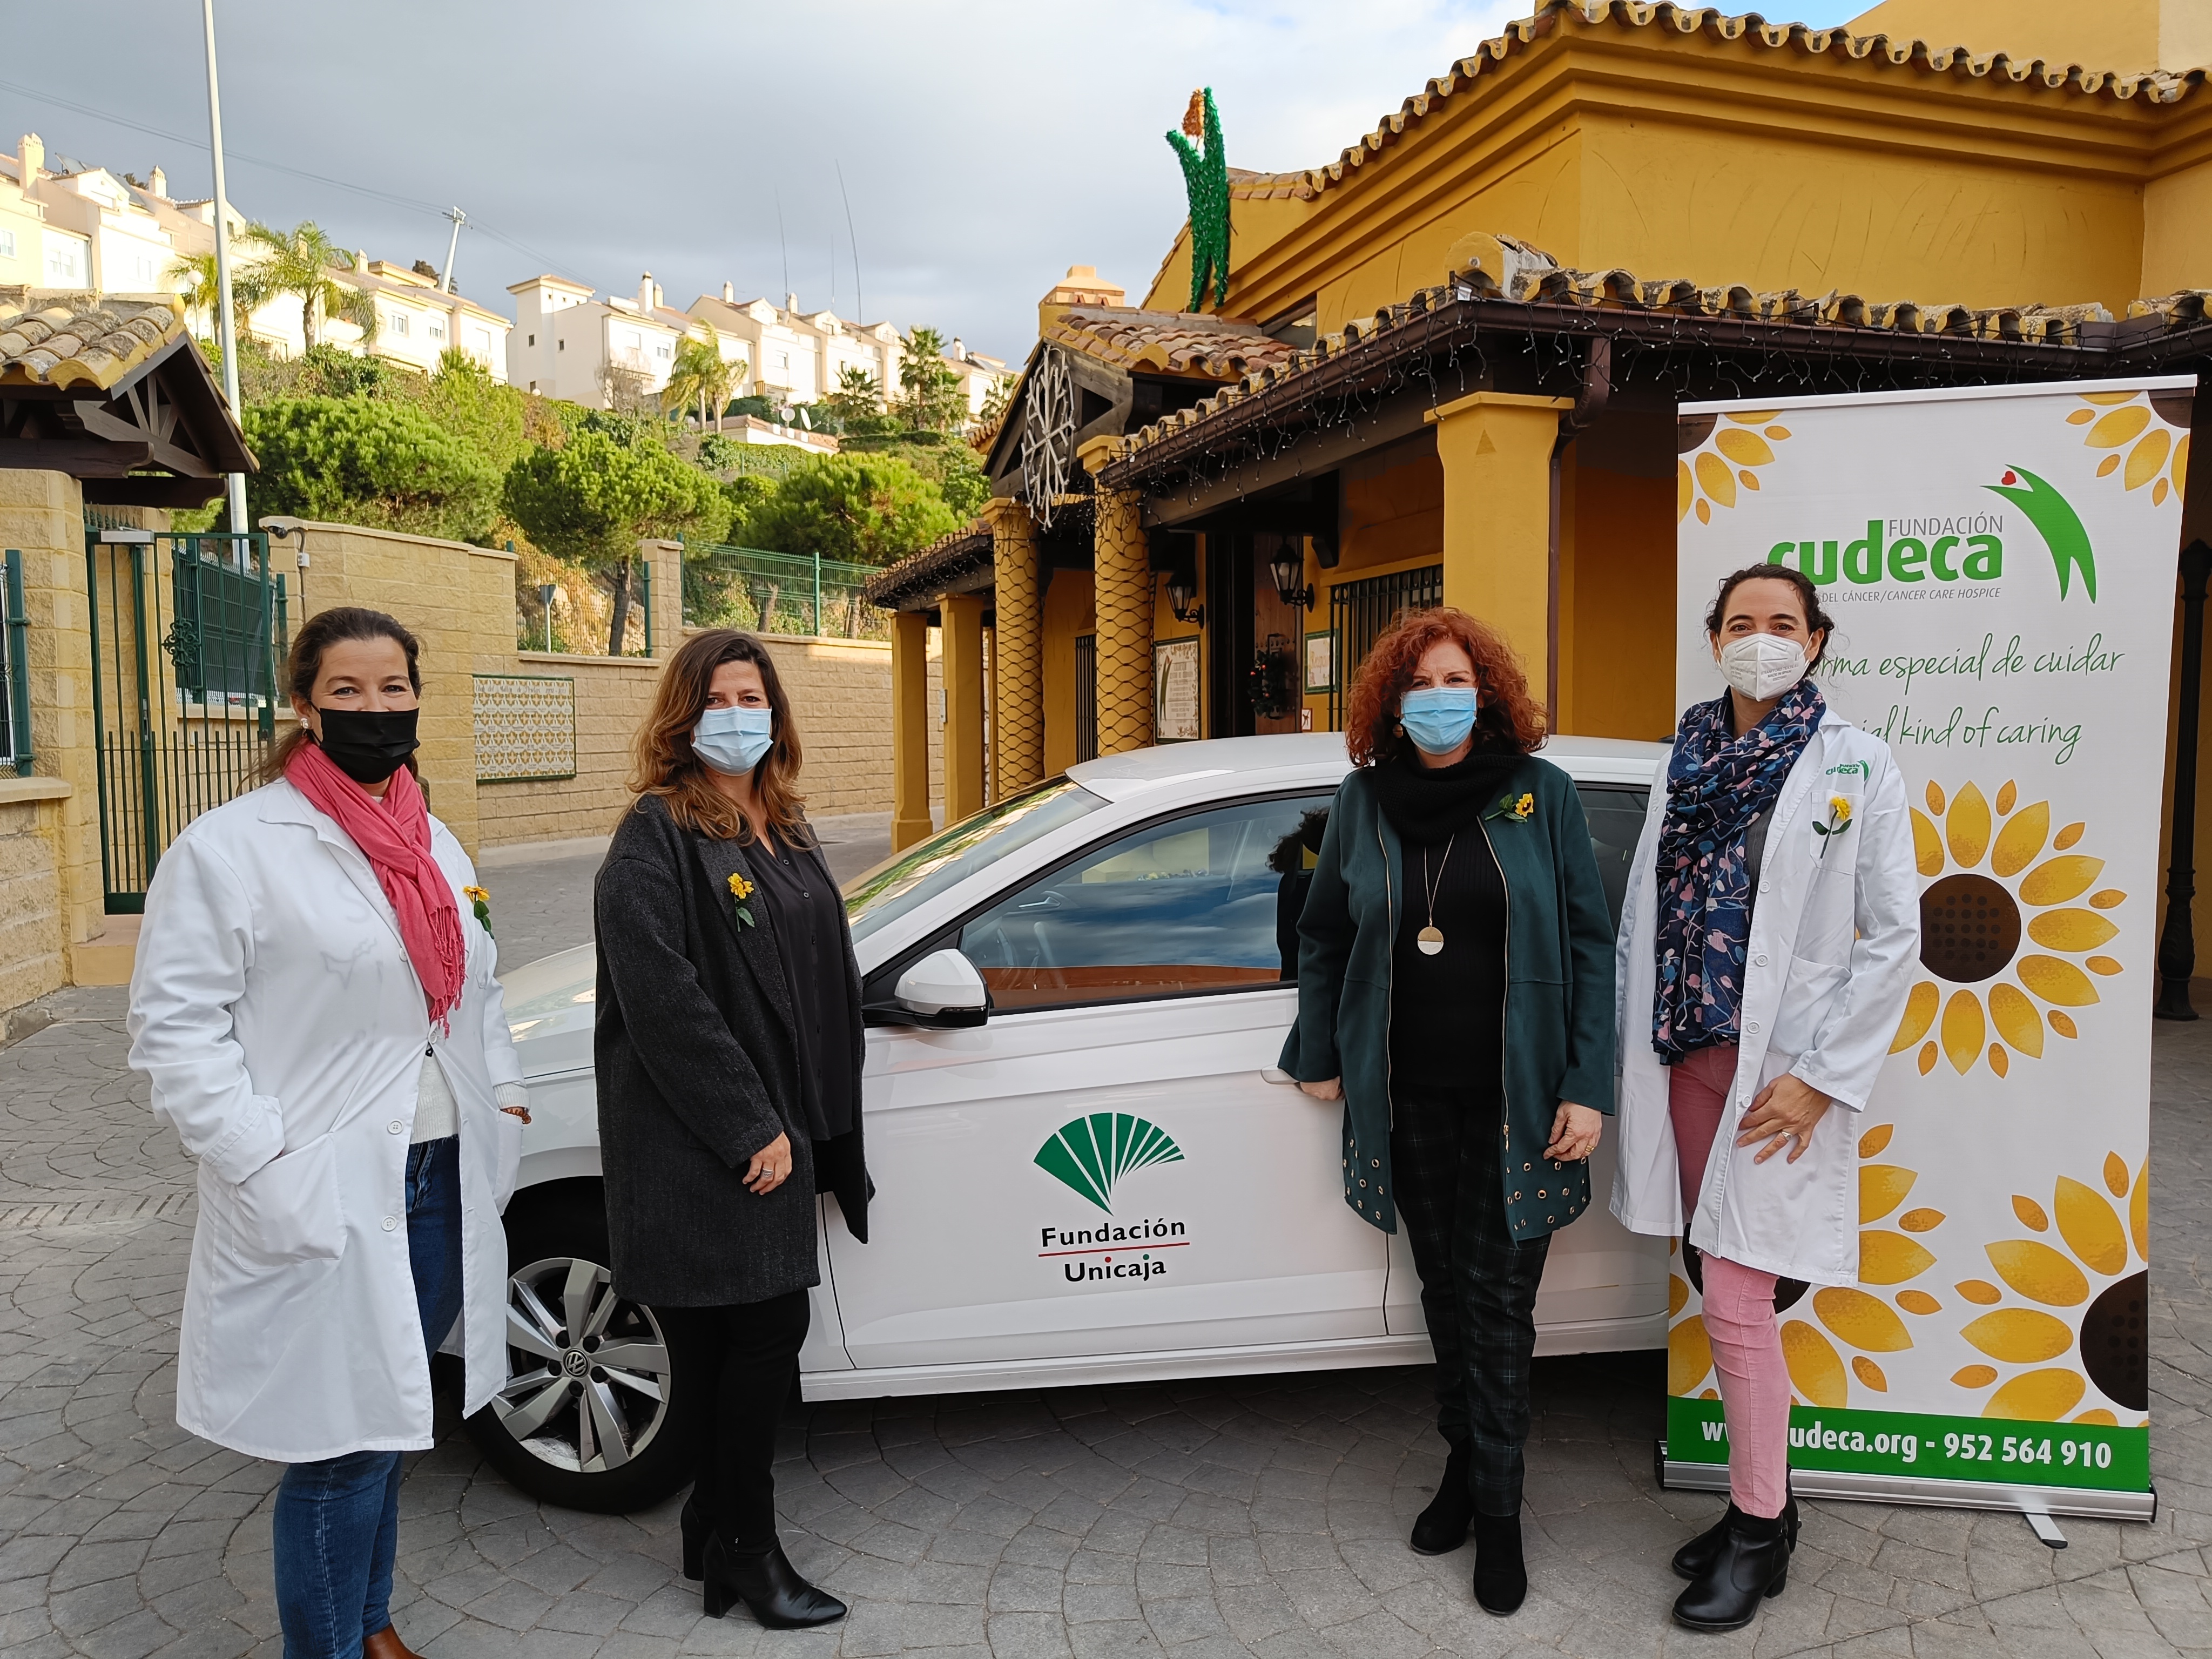 Great support from the Unicaja Foundation for our Home Care Programme